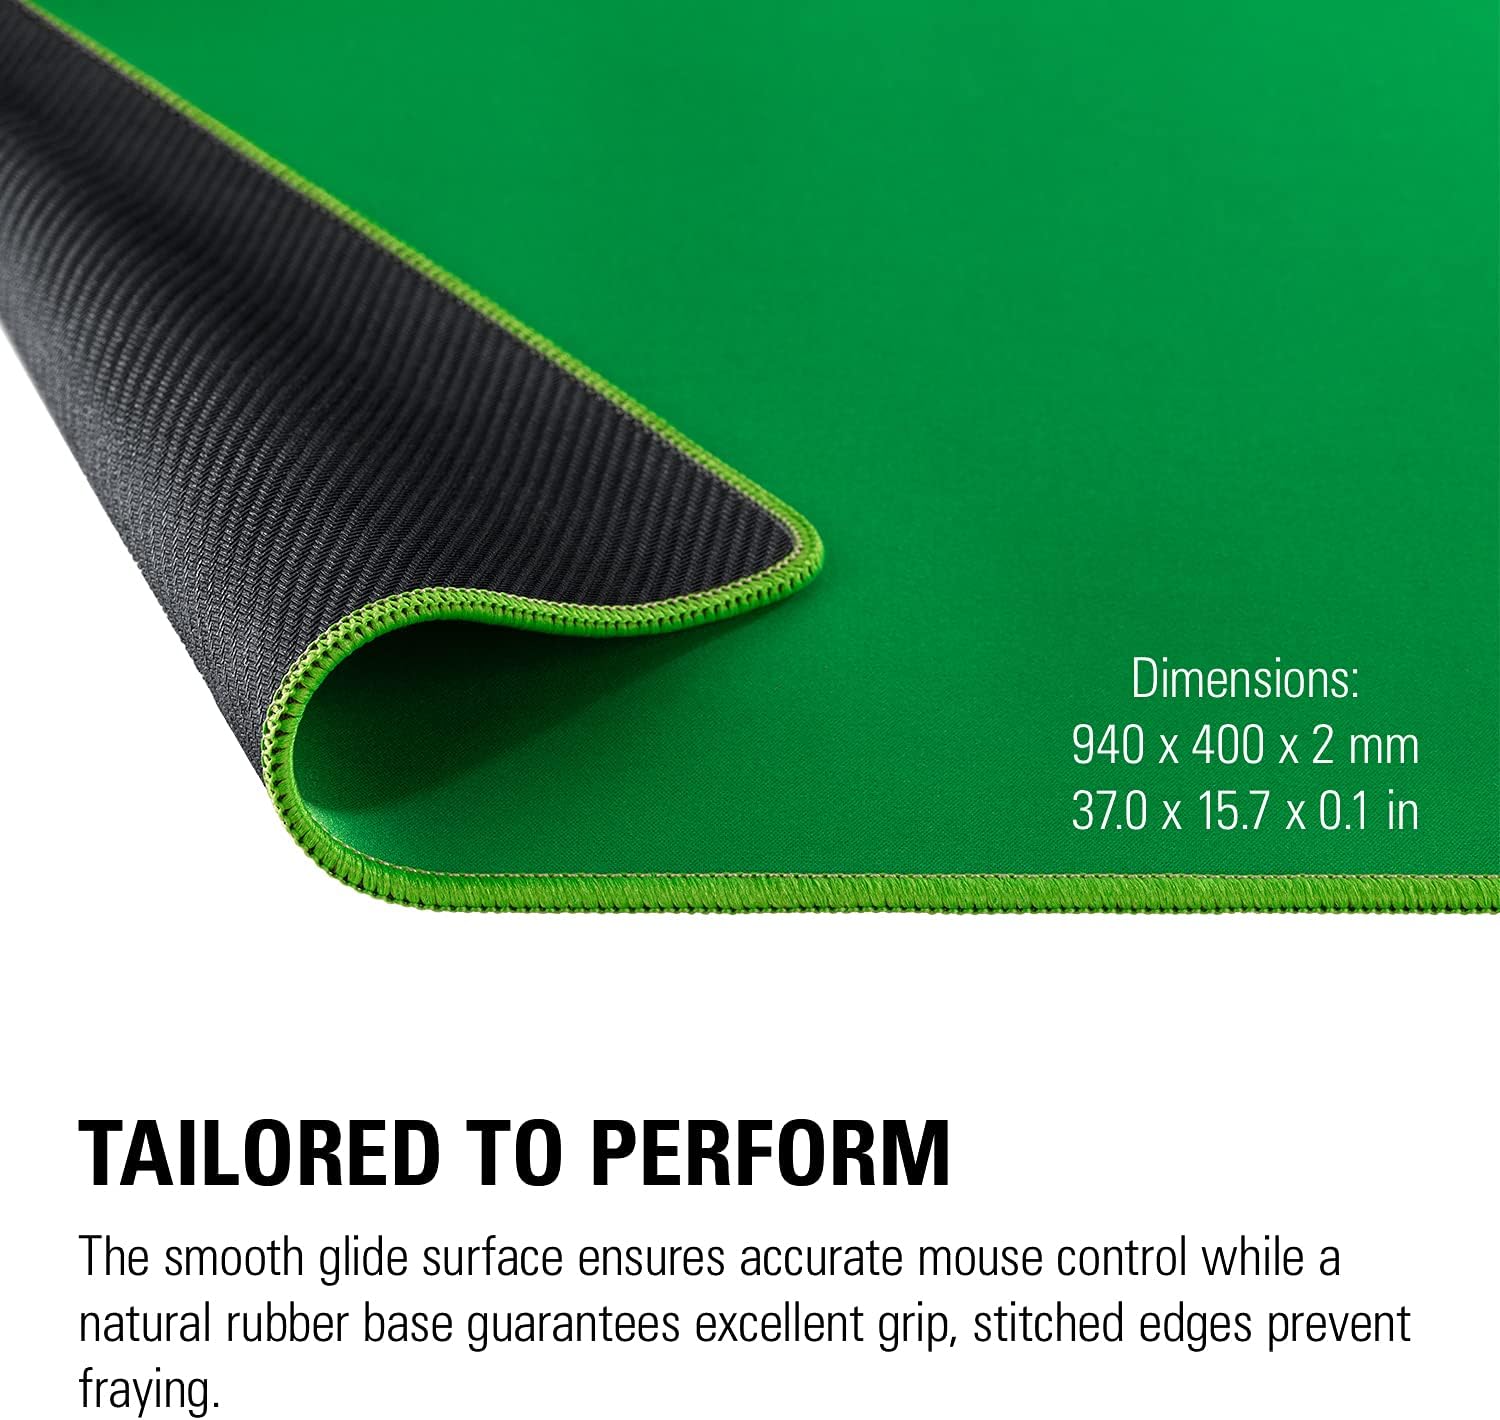 Elgato Green Screen Mouse Mat - Anti-skid rubber base for excellent grip 0840006630142